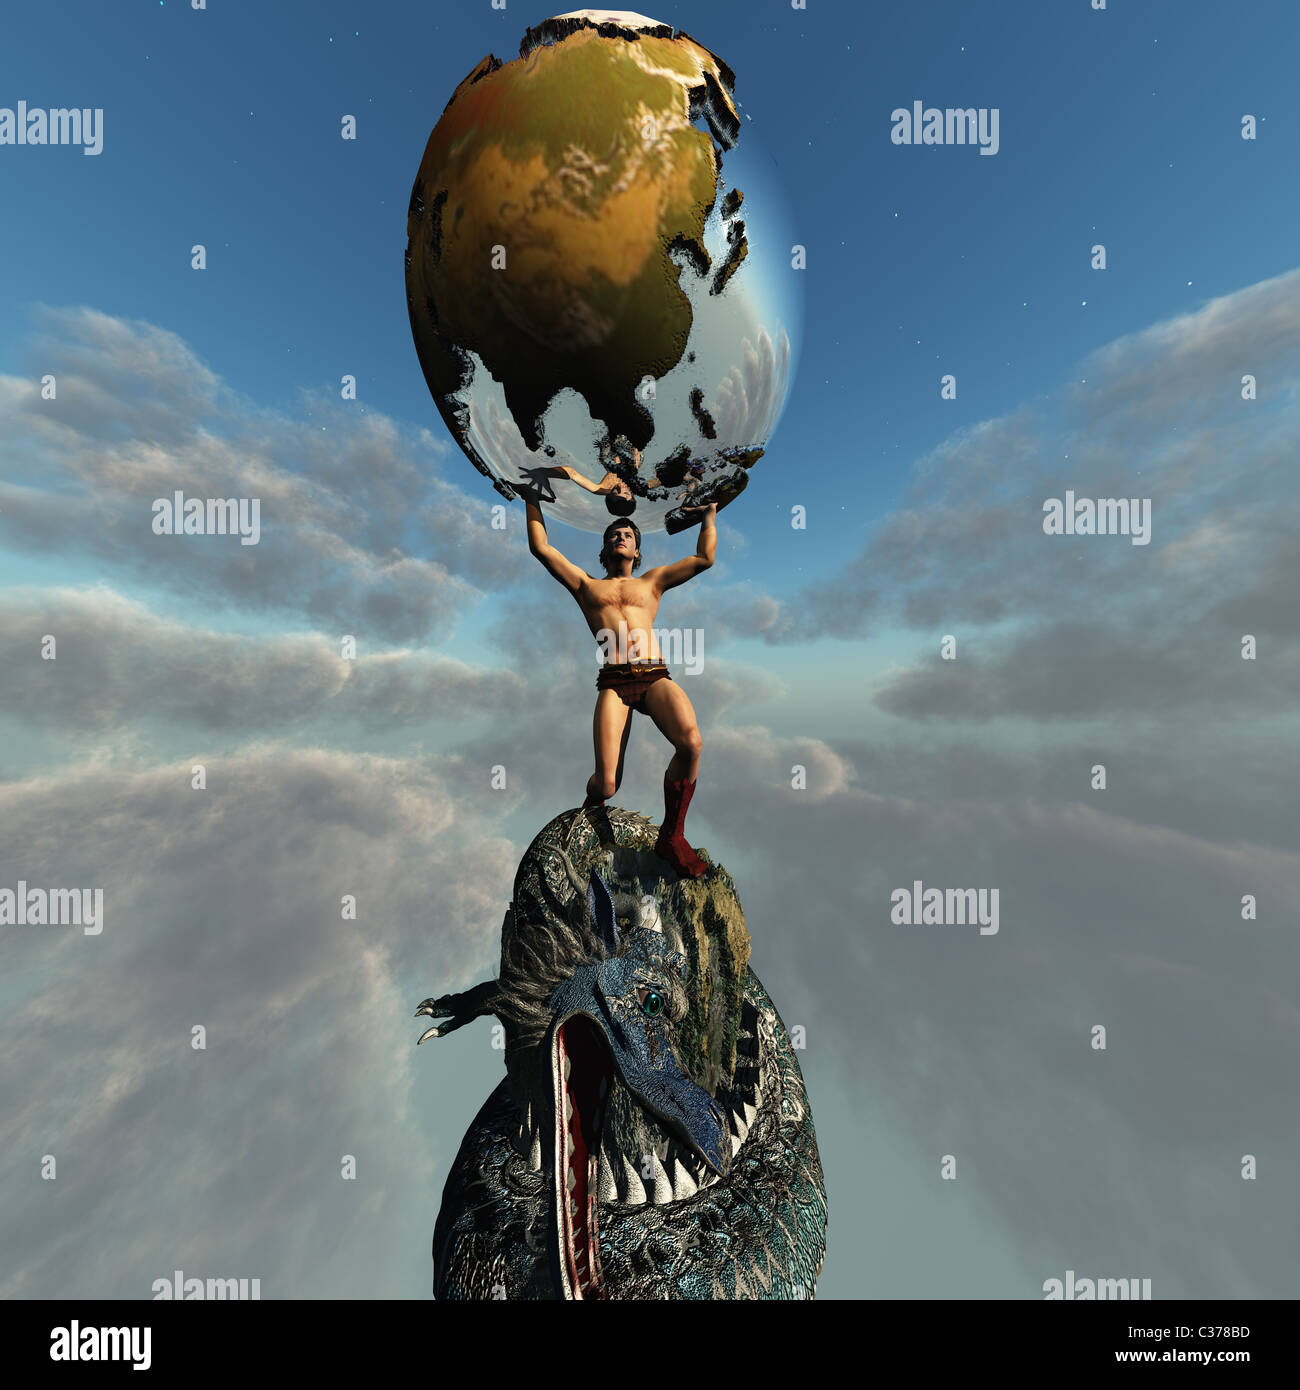 Atlas holds the Earth after he slays the dragon representing the peace and unity in this part of the world. Stock Photo